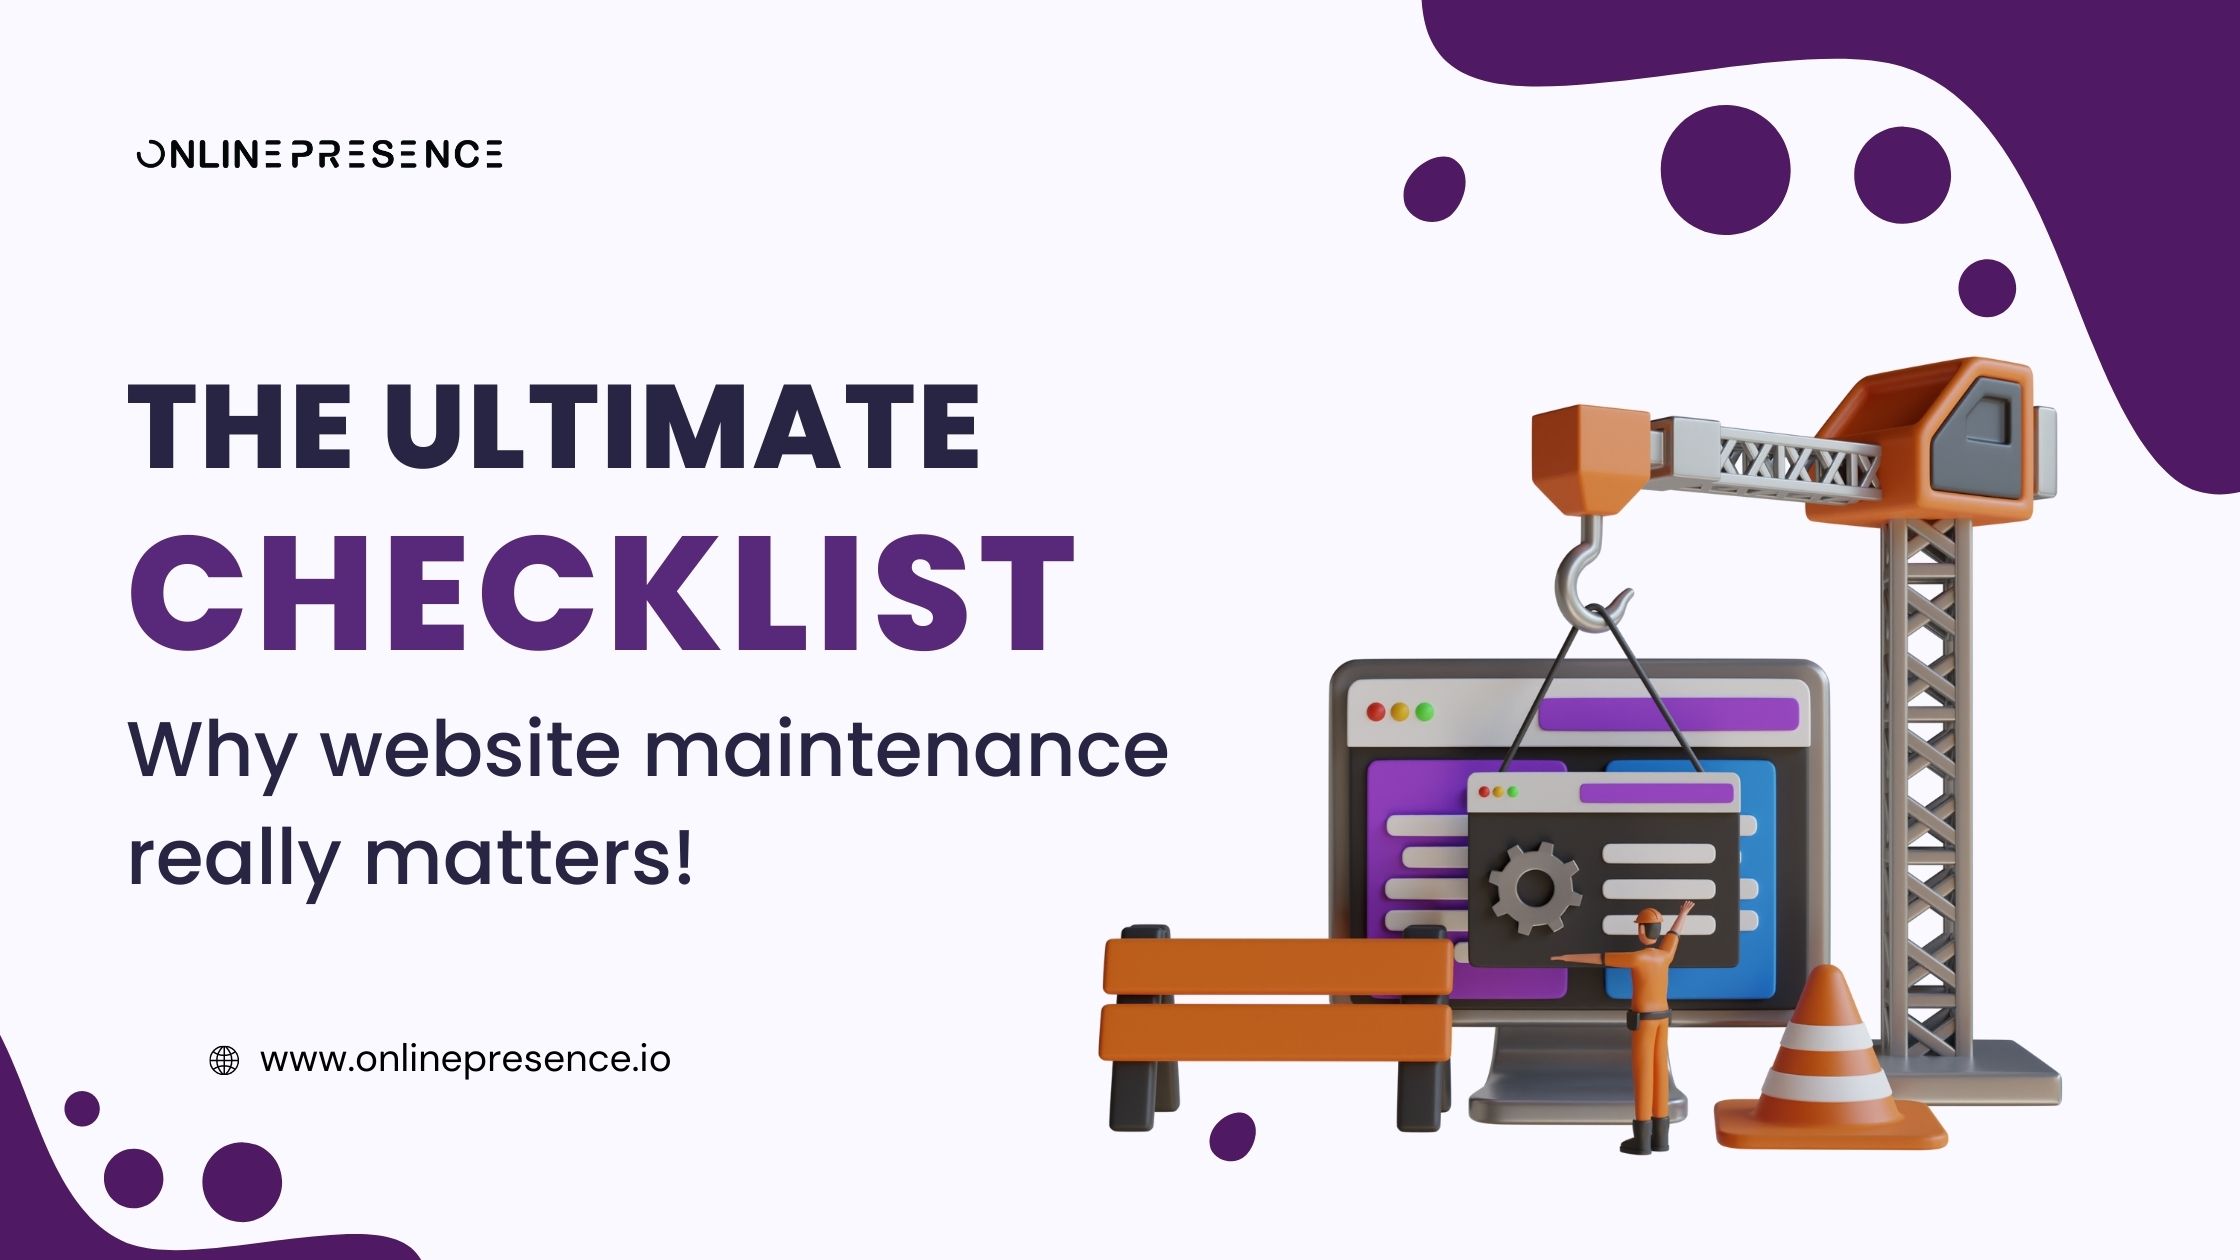 WHY WEBSITE MAINTENANCE REALLY MATTERS!